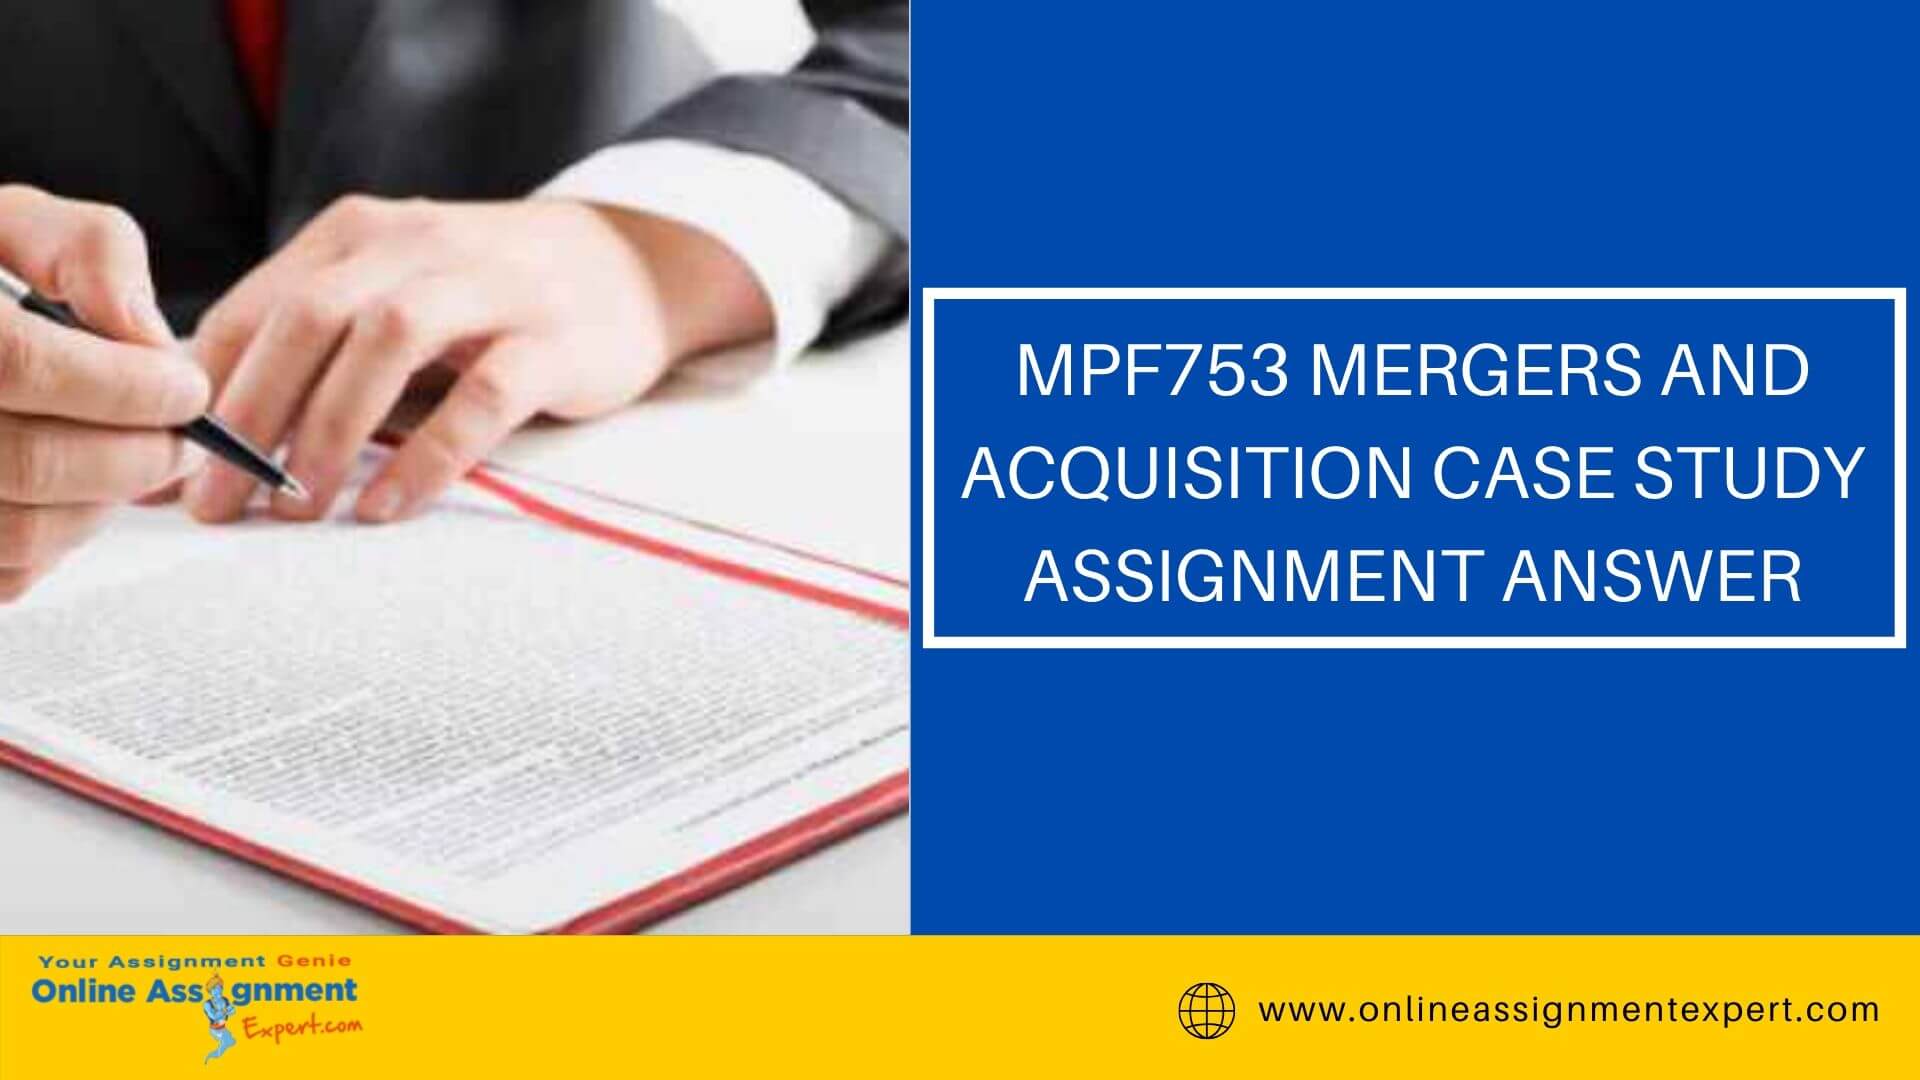 MPF753 Mergers and Acquisition Case Study Assignment Answer